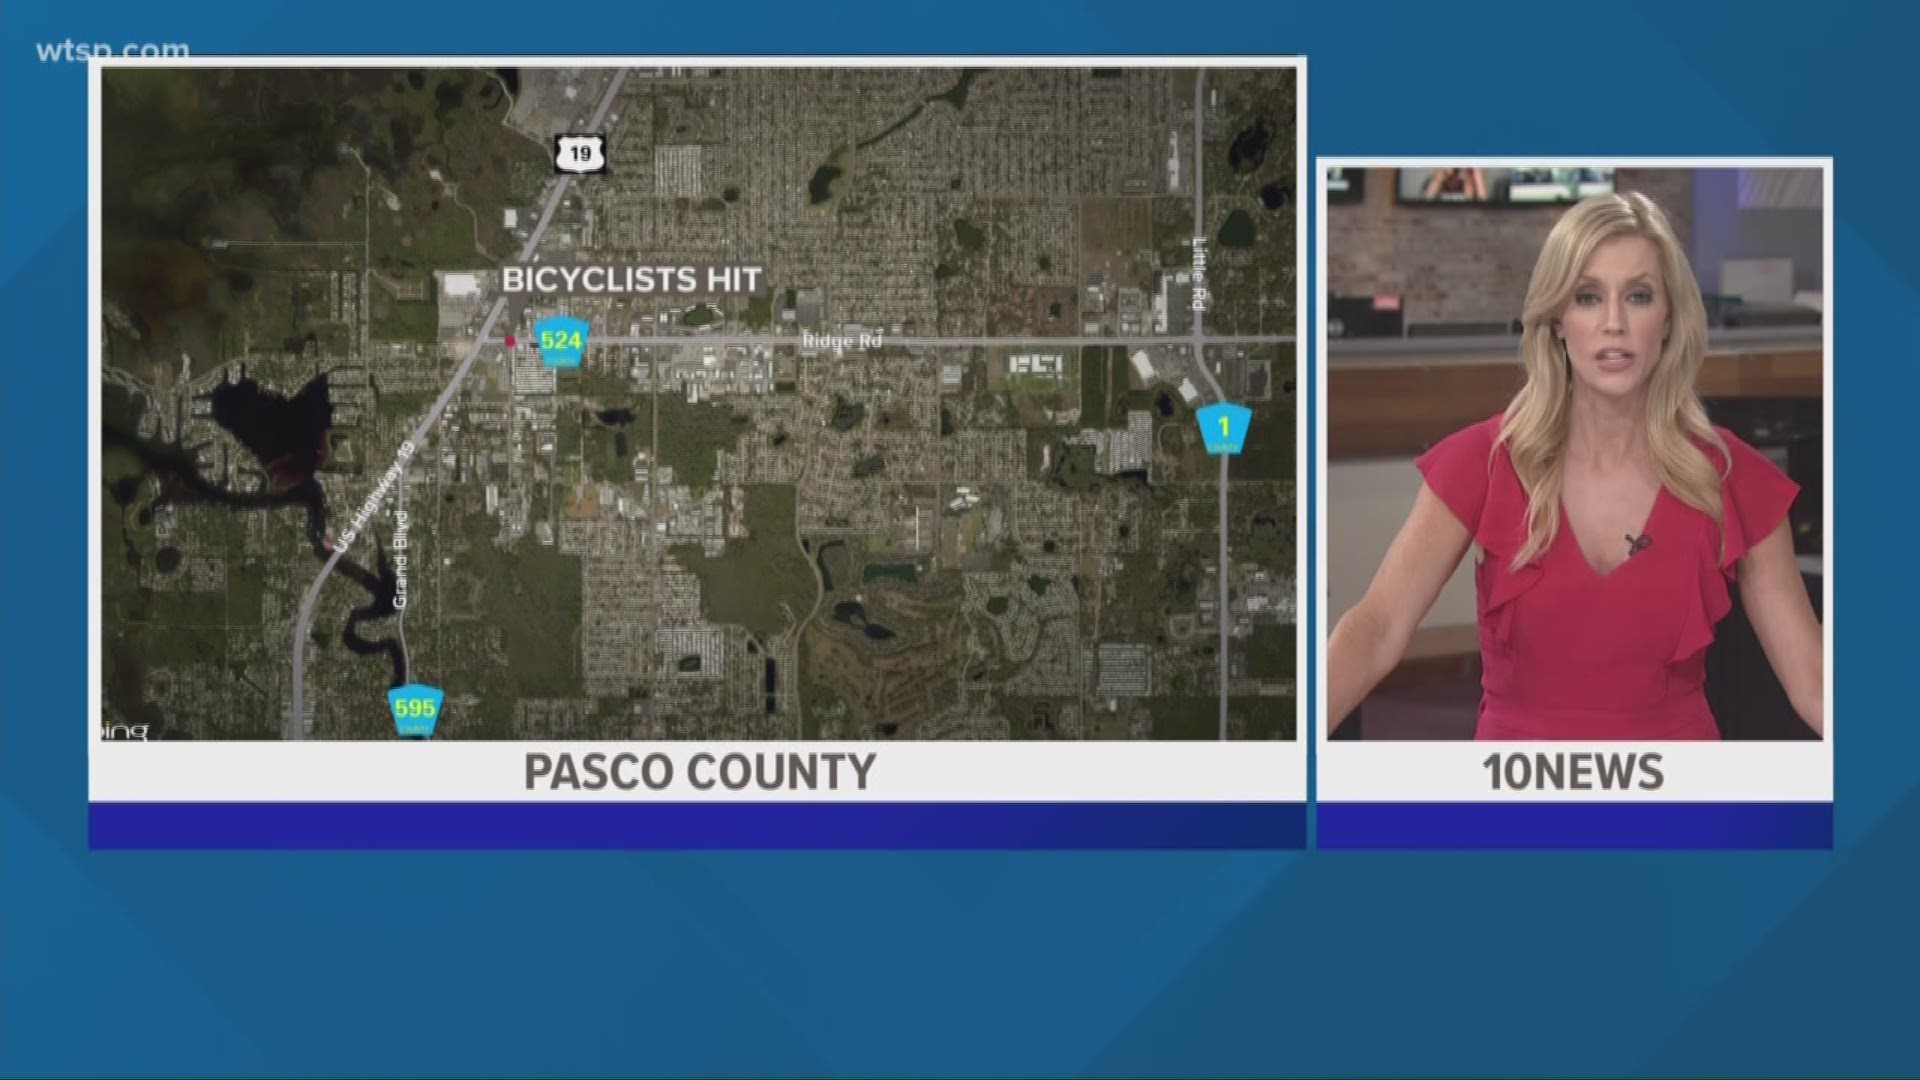 Four people were hurt, three of them badly, during a hit-and-run crash, officials said.

According to Pasco County Fire Rescue, a vehicle was headed east Monday evening on Ridge Road at U.S. 19 and Leo Kidd when its liftgate came loose and fell open. The gate hit four bicyclists.